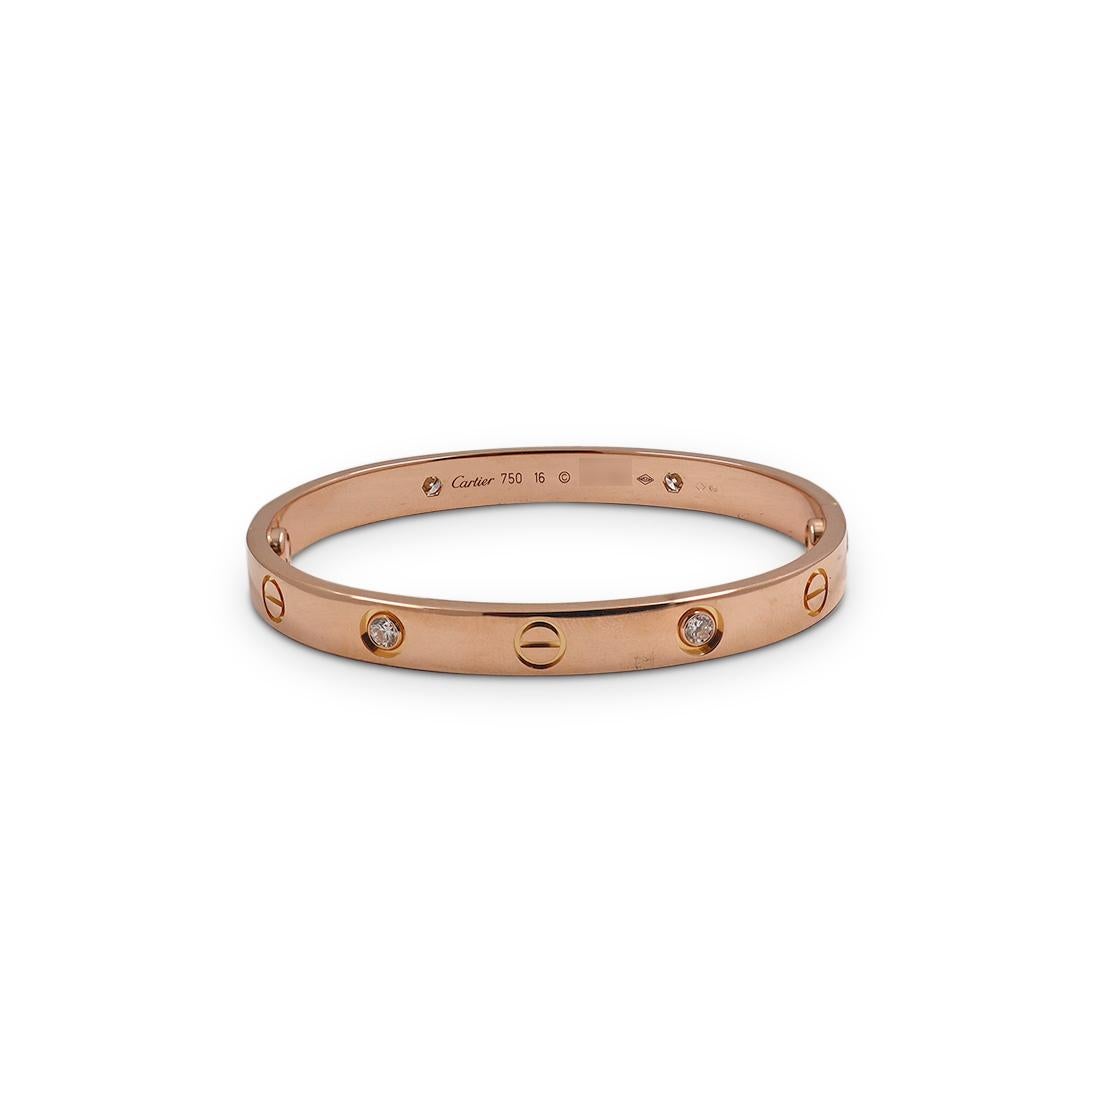 Authentic Cartier 'Love' bangle bracelet crafted in 18 karat rose gold set with four round brilliant cut diamonds (G-H in color, VS clarity) weighing an estimated 0.42 carats total. Signed Cartier, 750, 16, with serial number and hallmarks. The